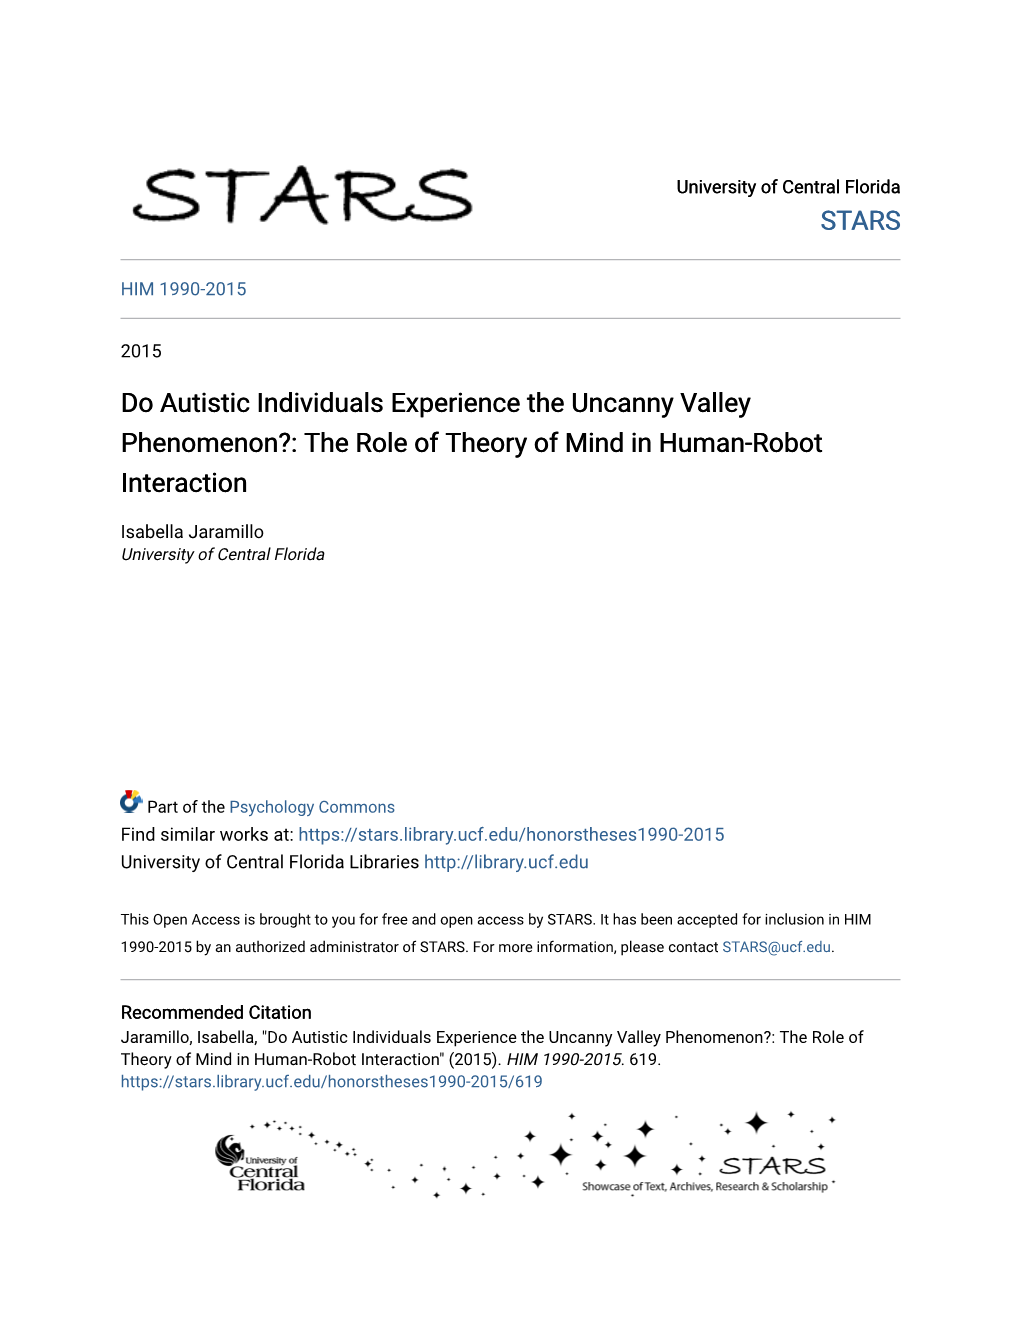 Do Autistic Individuals Experience the Uncanny Valley Phenomenon?: the Role of Theory of Mind in Human-Robot Interaction